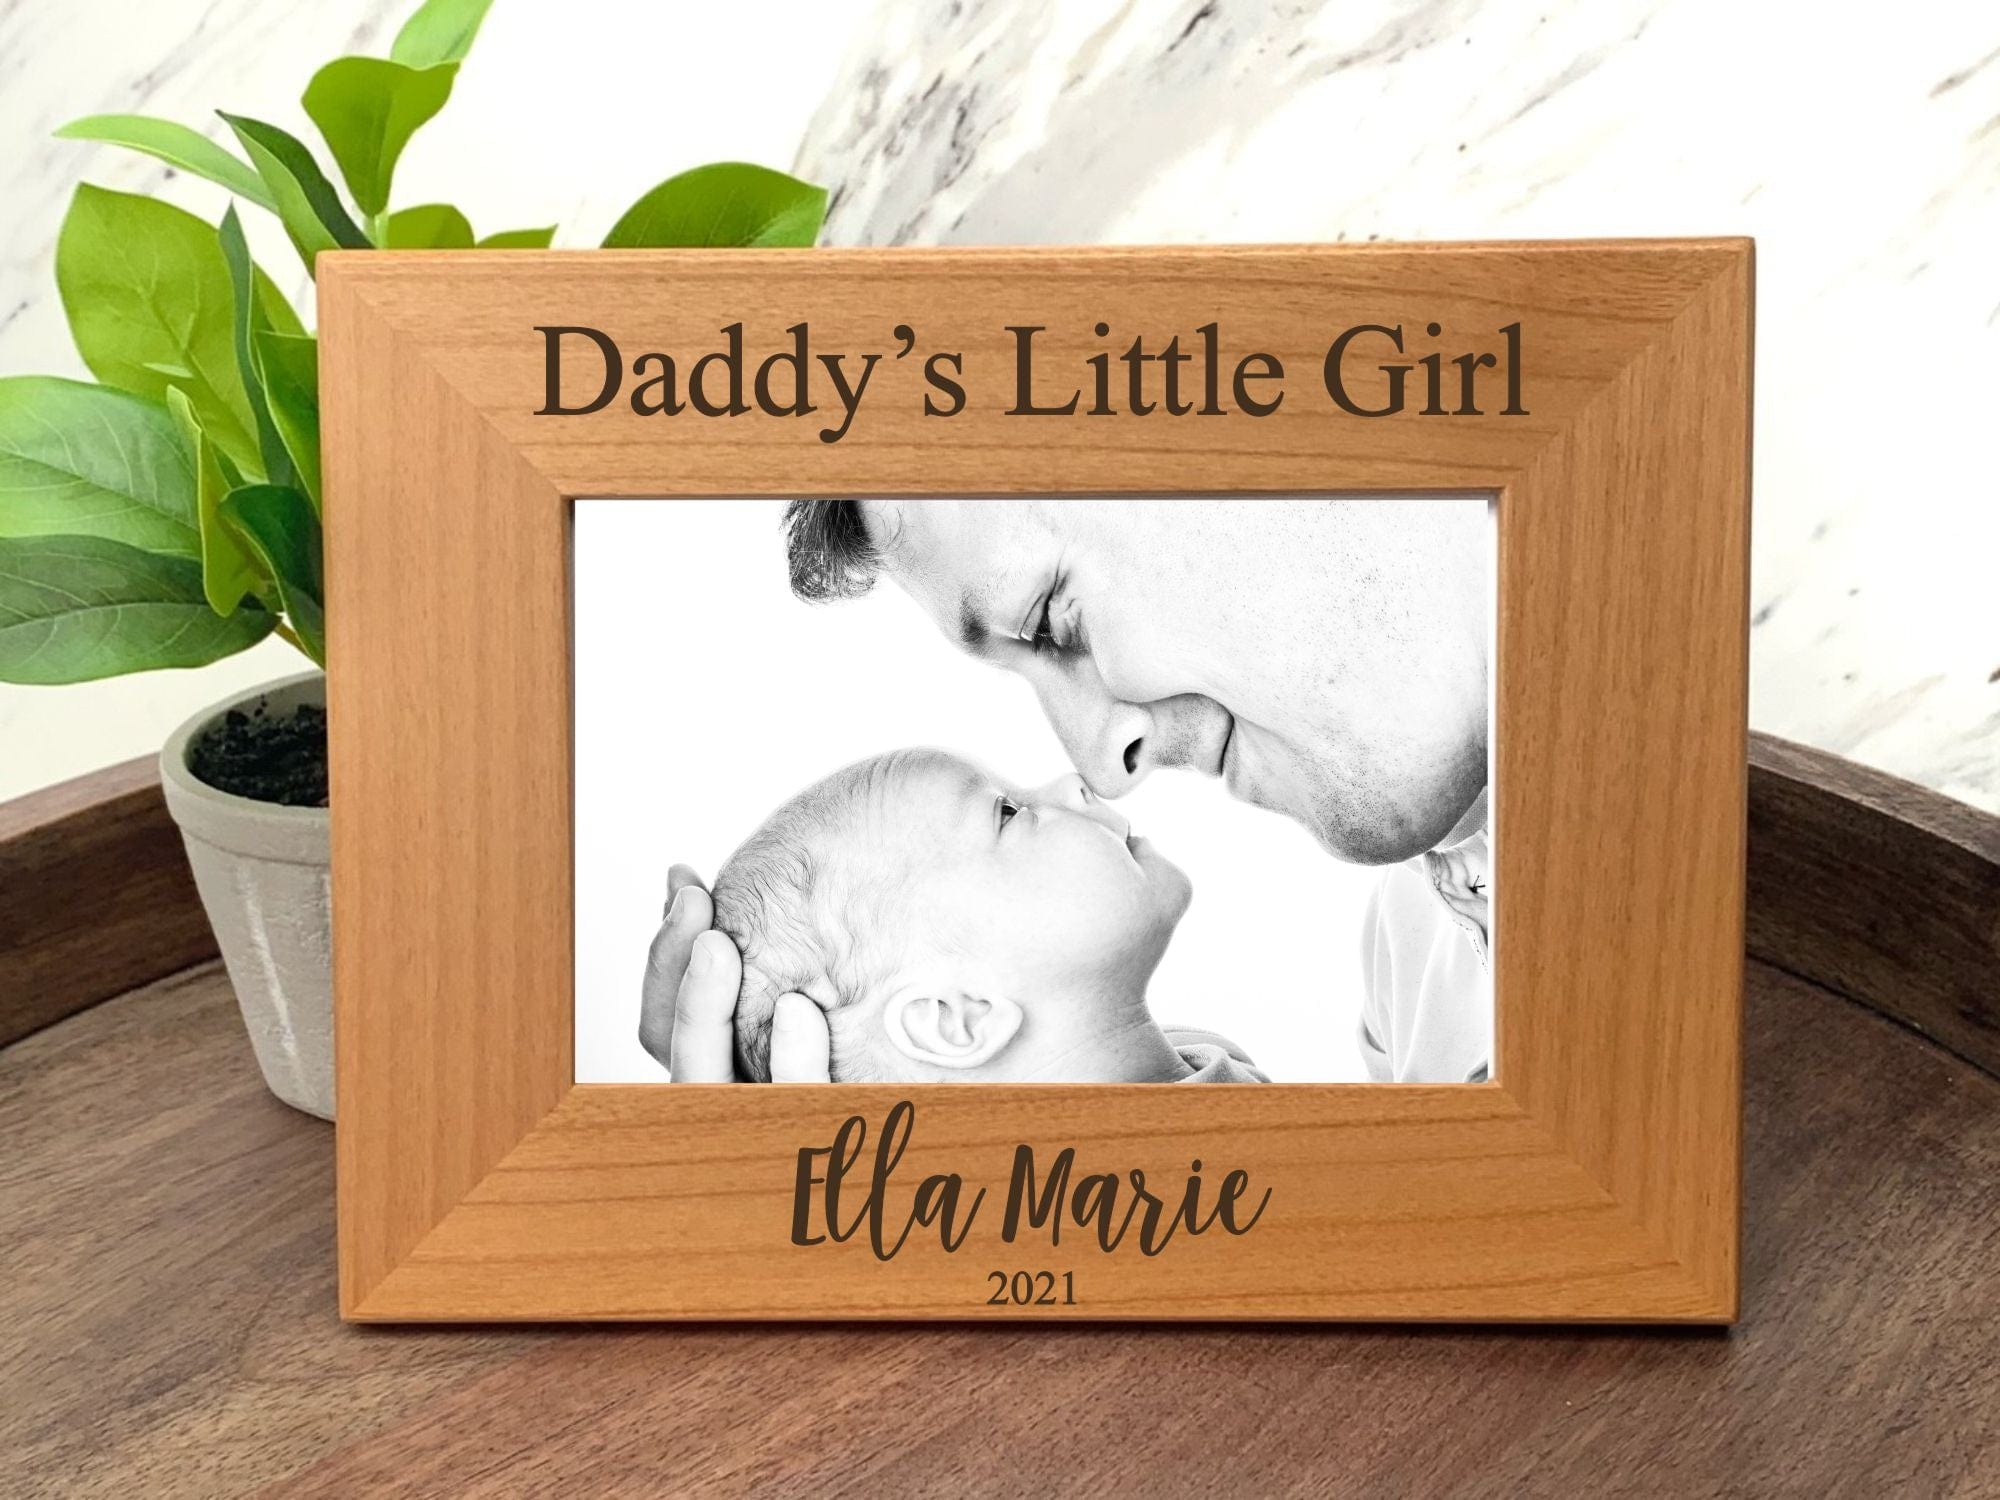 Daddy's Little Girl Engraved Wood Picture Frame Personalized - New Dad Gift